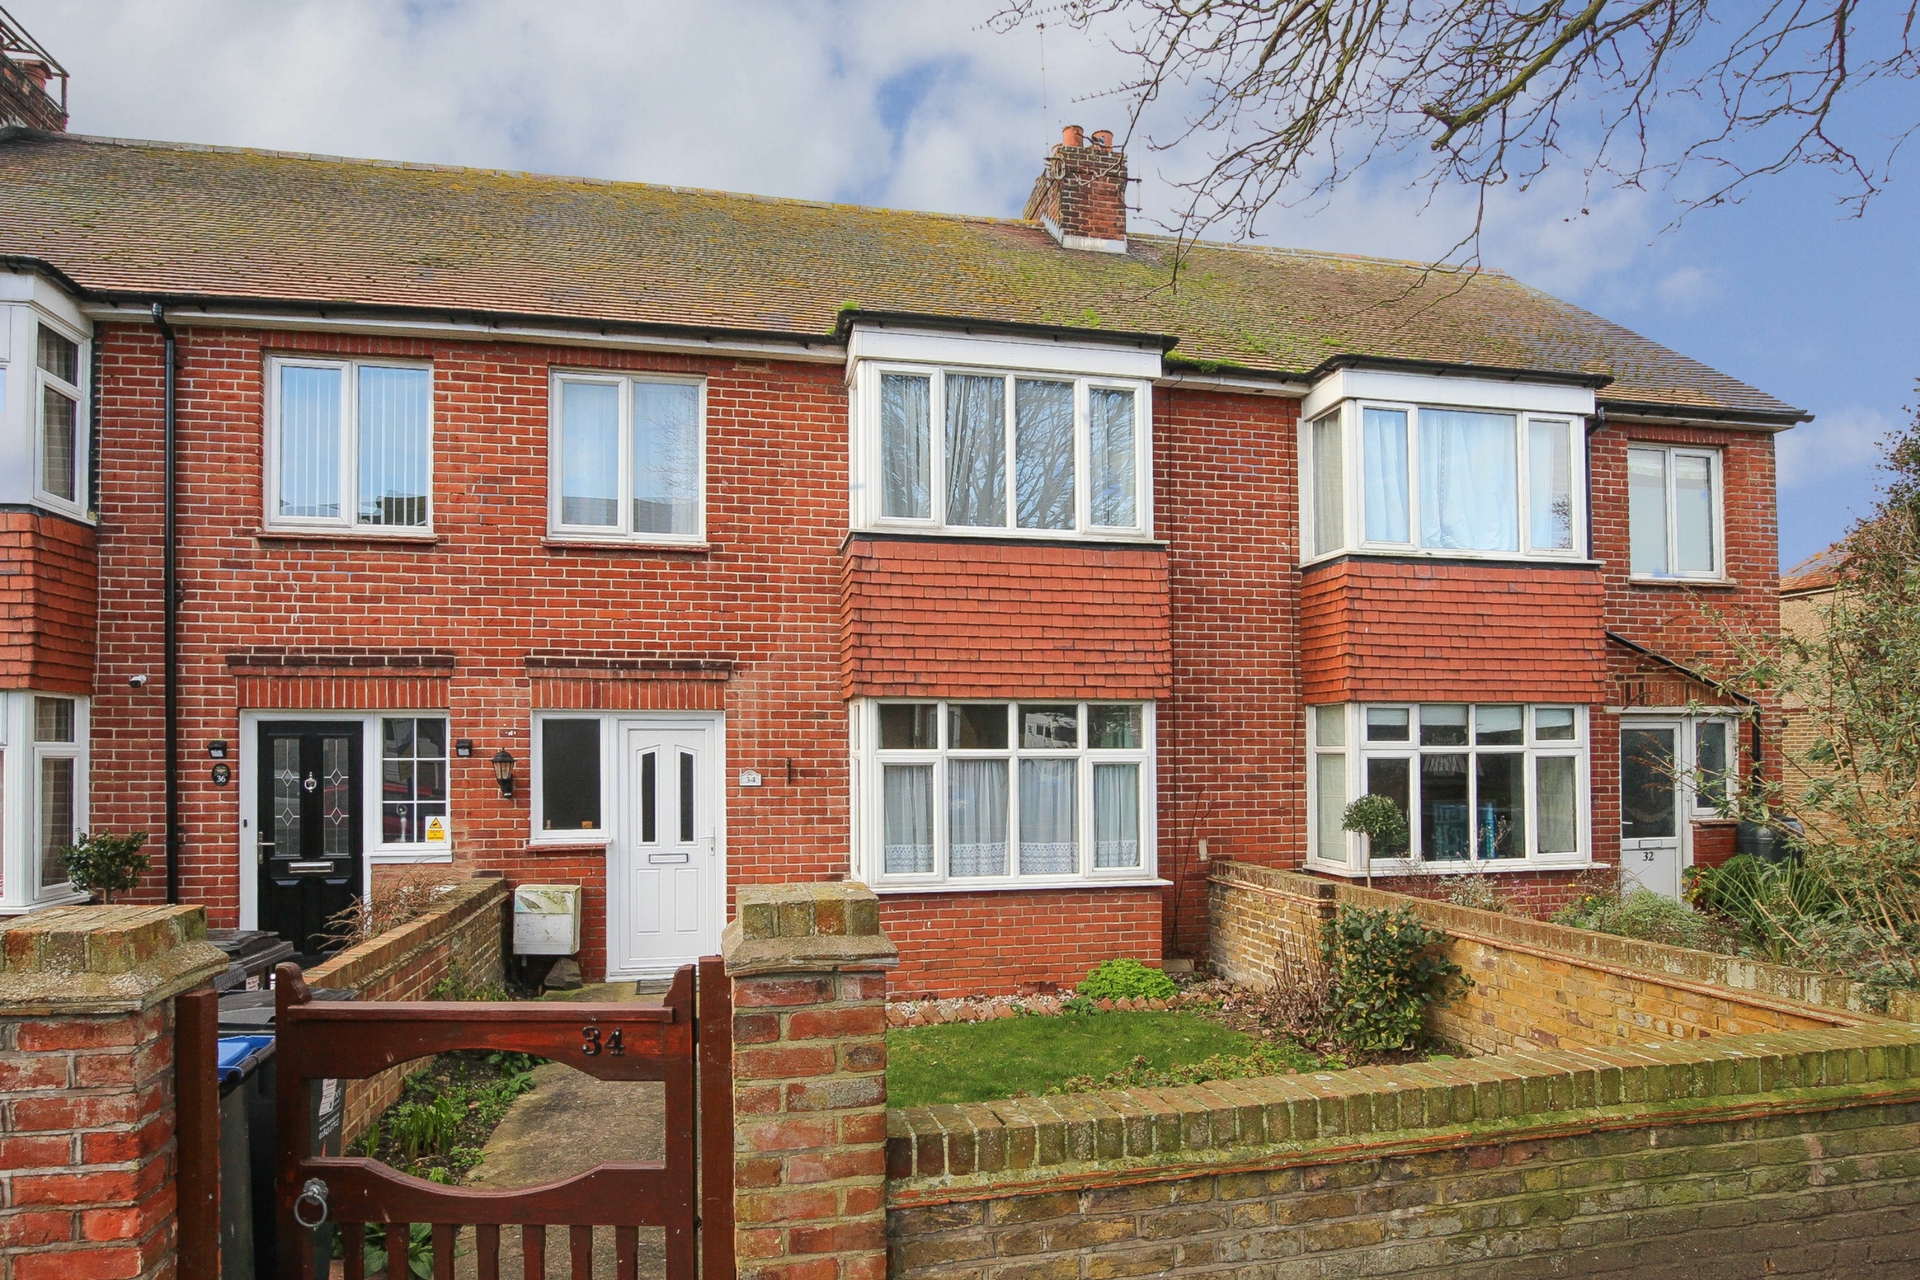 3 bed terraced house for sale in Ethelbert Road, Birchington - Property Image 1